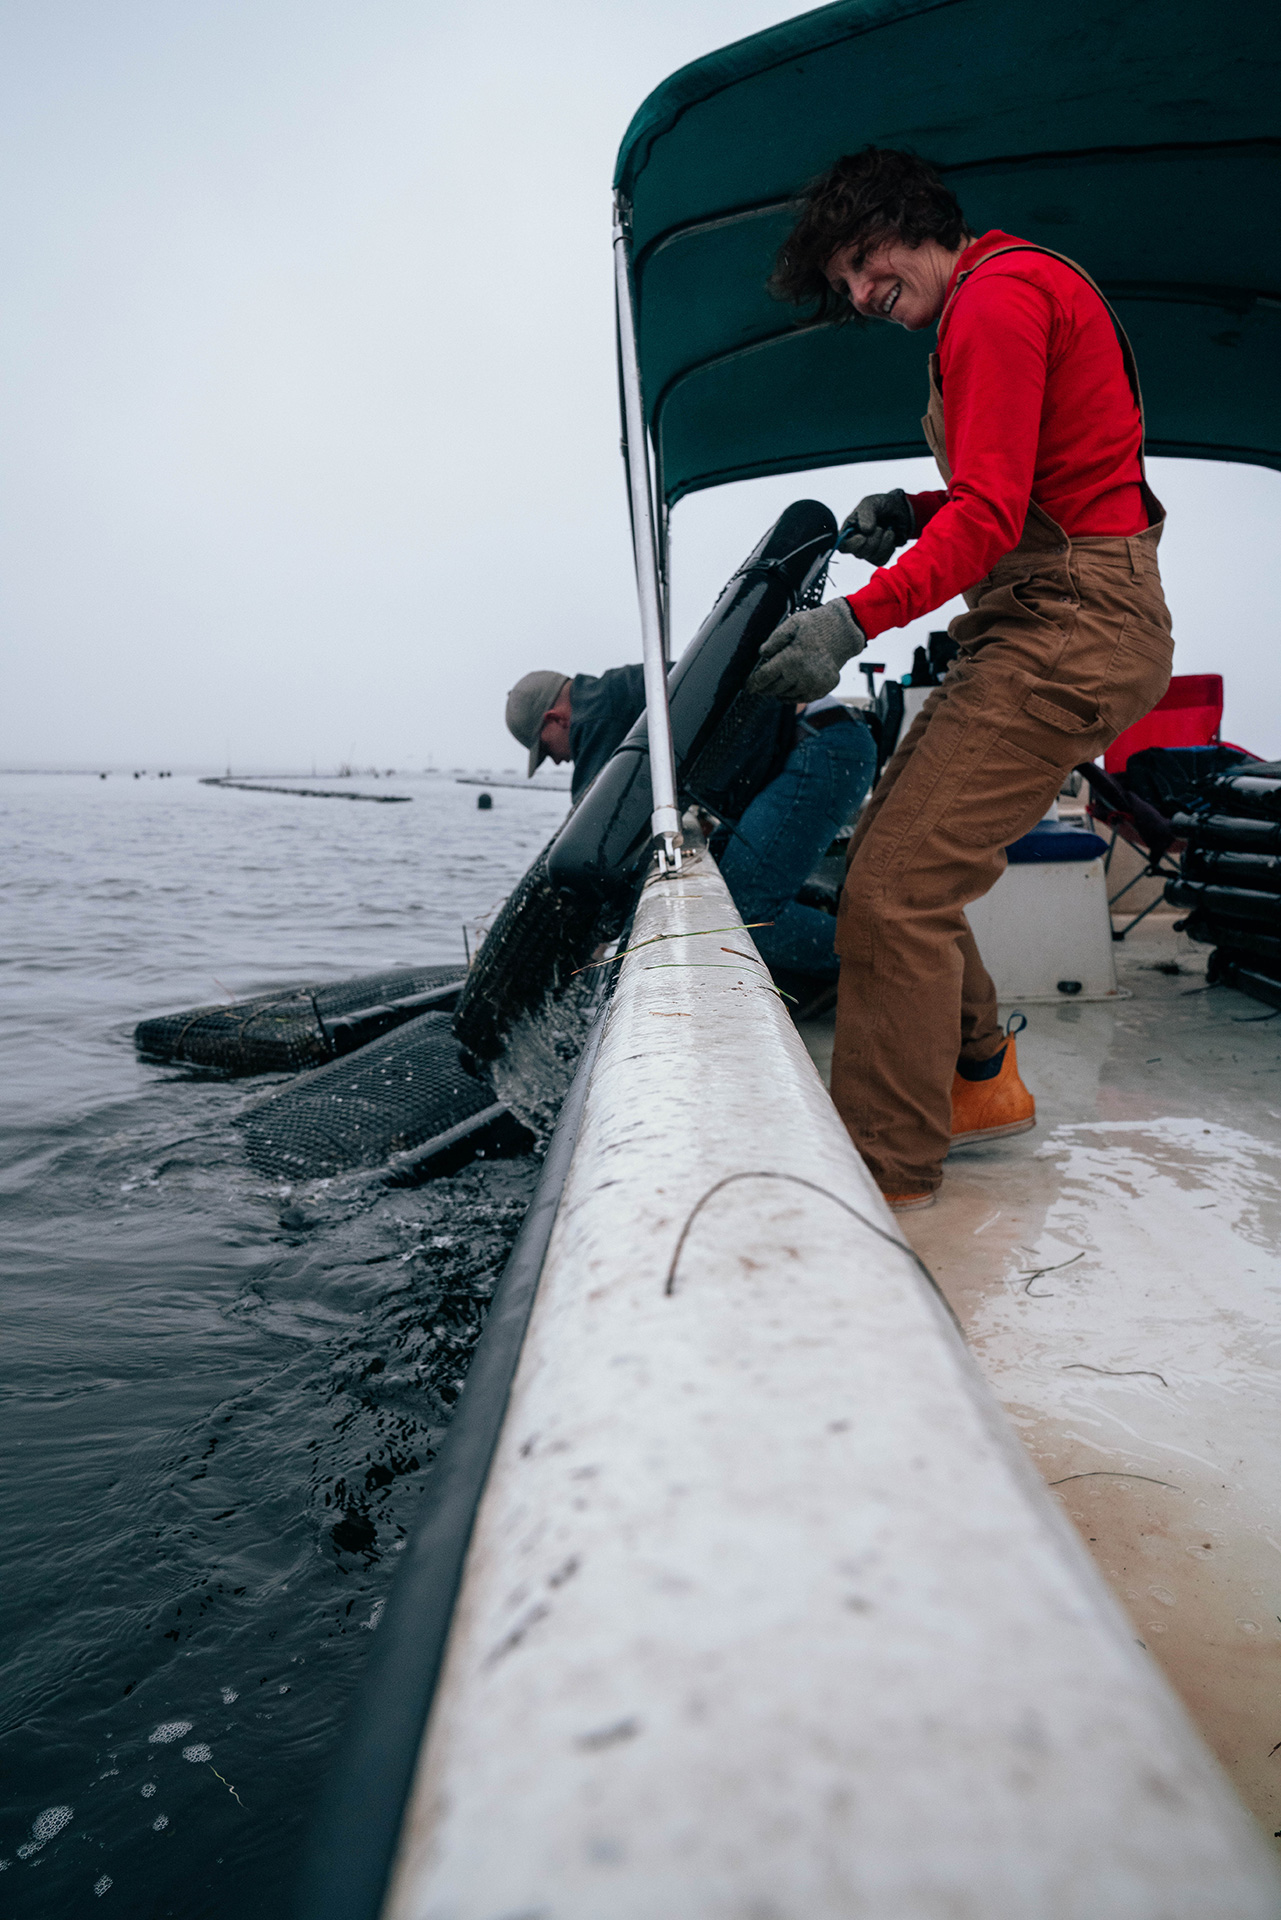 Jody says her farm uses a “high touch” approach that requires her team to pull the oysters regularly  from the water, sort them and replace them in new oyster bags to ensure the bivalves have the right water flow and the room they need to grow.